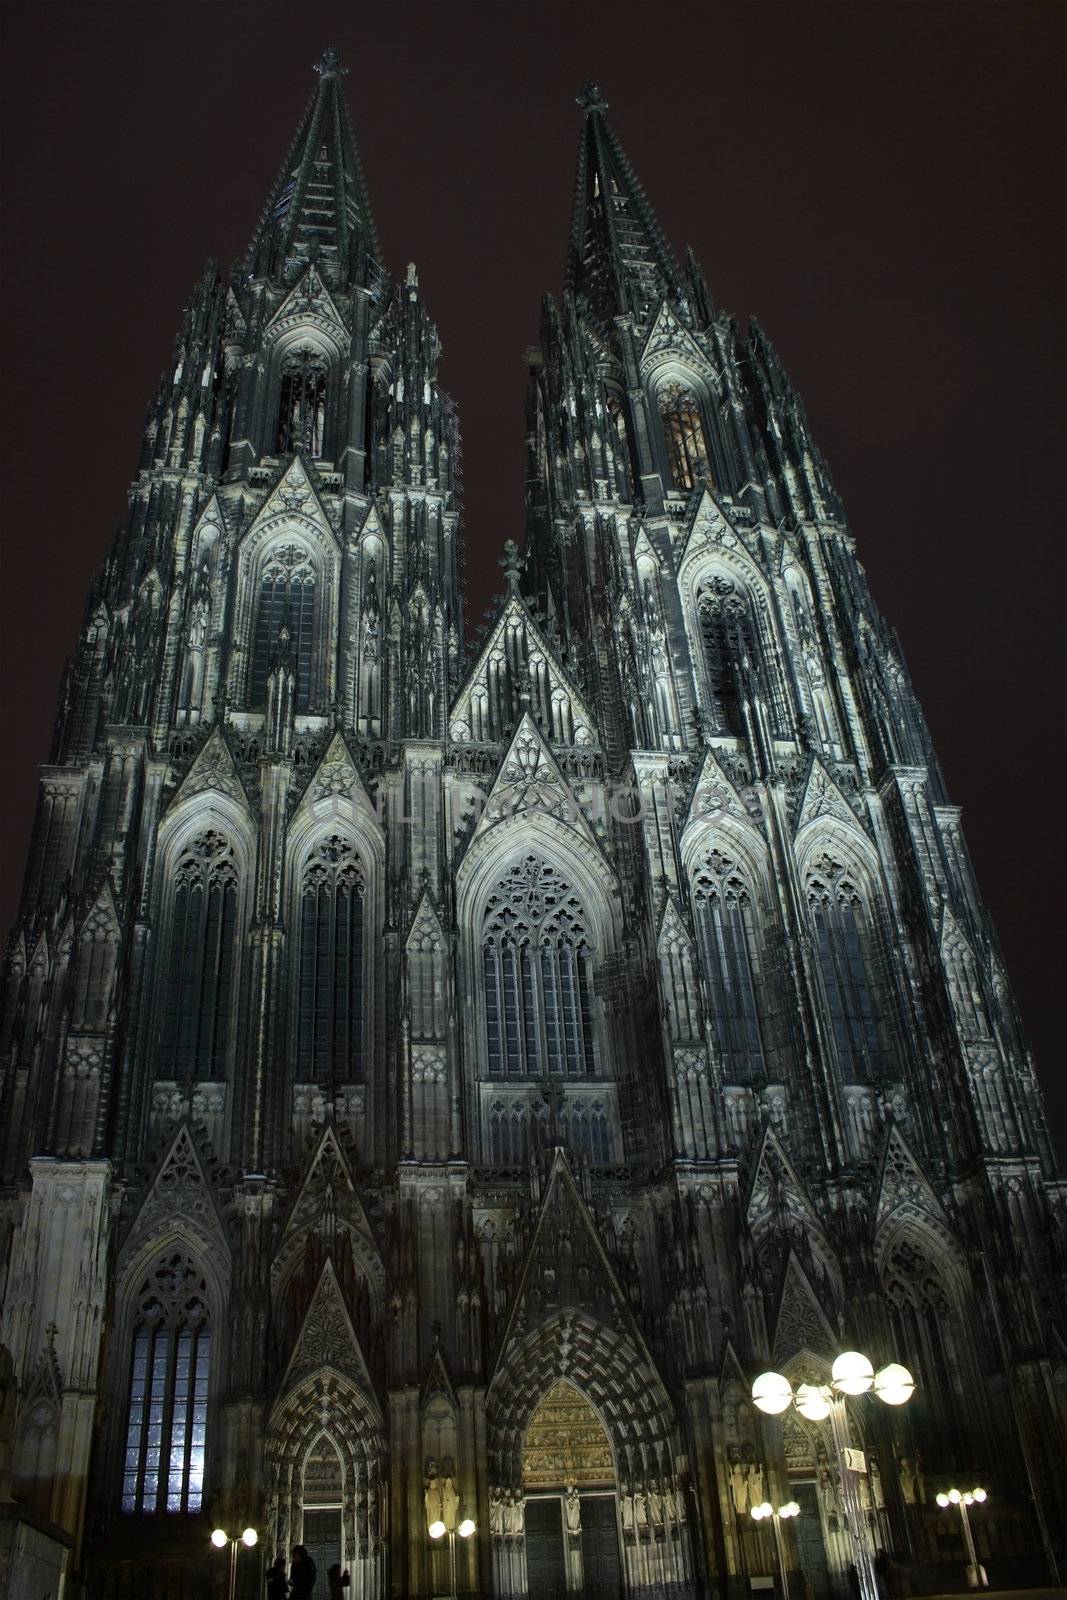 Cologne Cathedral In The Night by kvkirillov